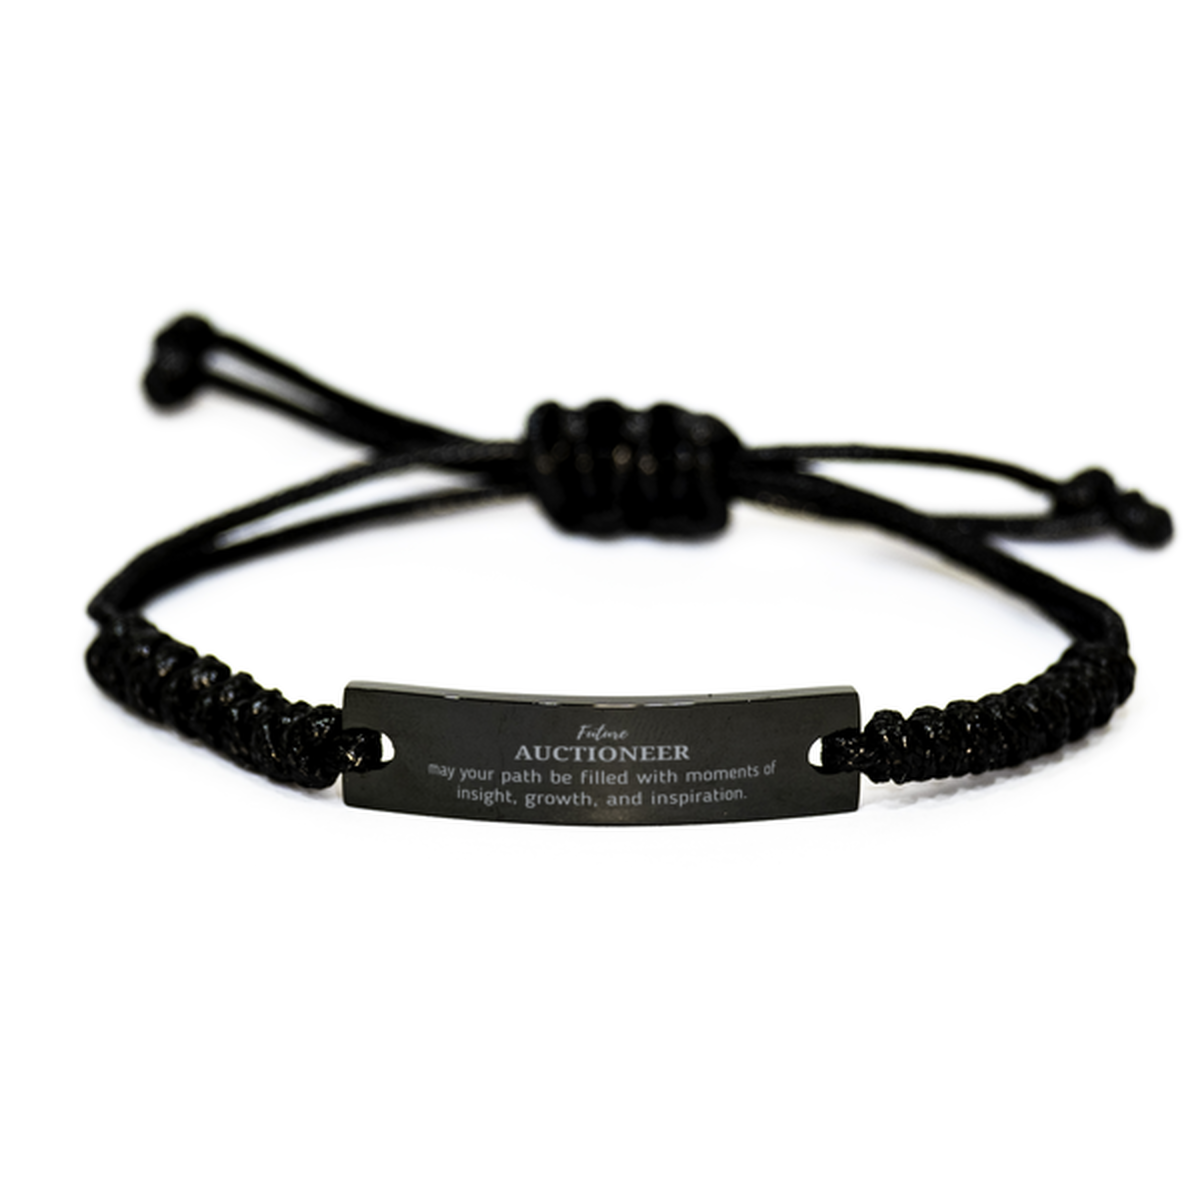 Future Auctioneer Gifts, May your path be filled with moments of insight, Graduation Gifts for New Auctioneer, Christmas Unique Black Rope Bracelet For Men, Women, Friends